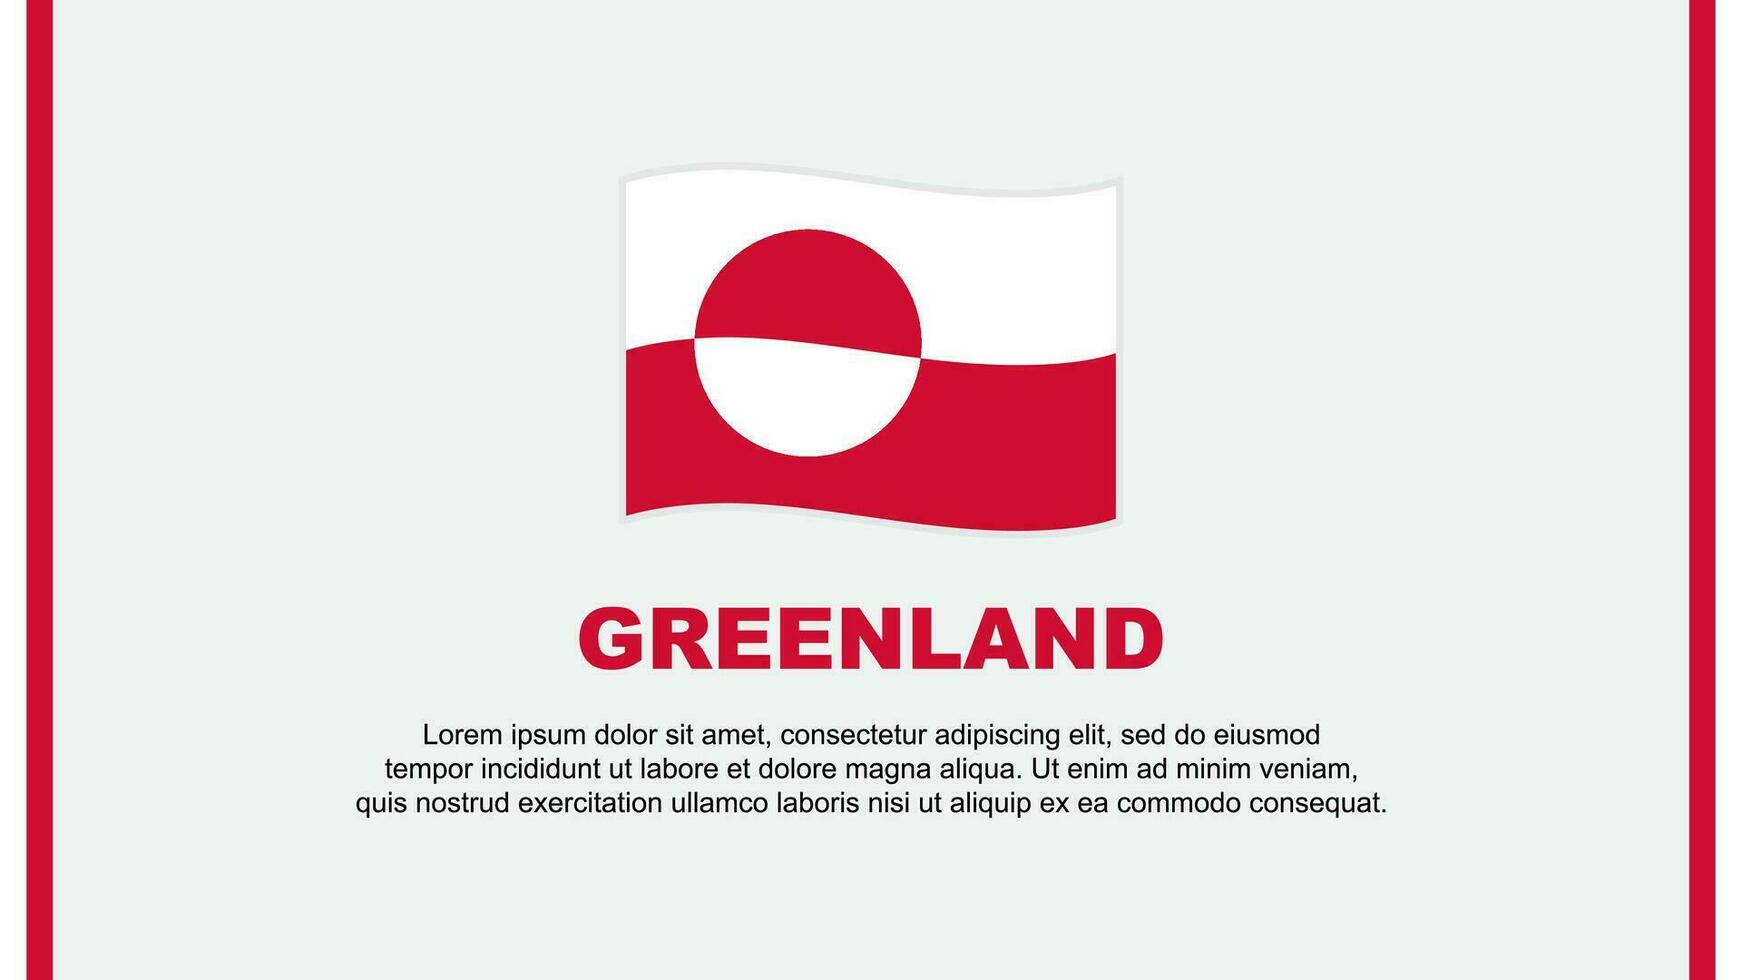 Greenland Flag Abstract Background Design Template. Greenland Independence Day Banner Social Media Vector Illustration. Greenland Cartoon